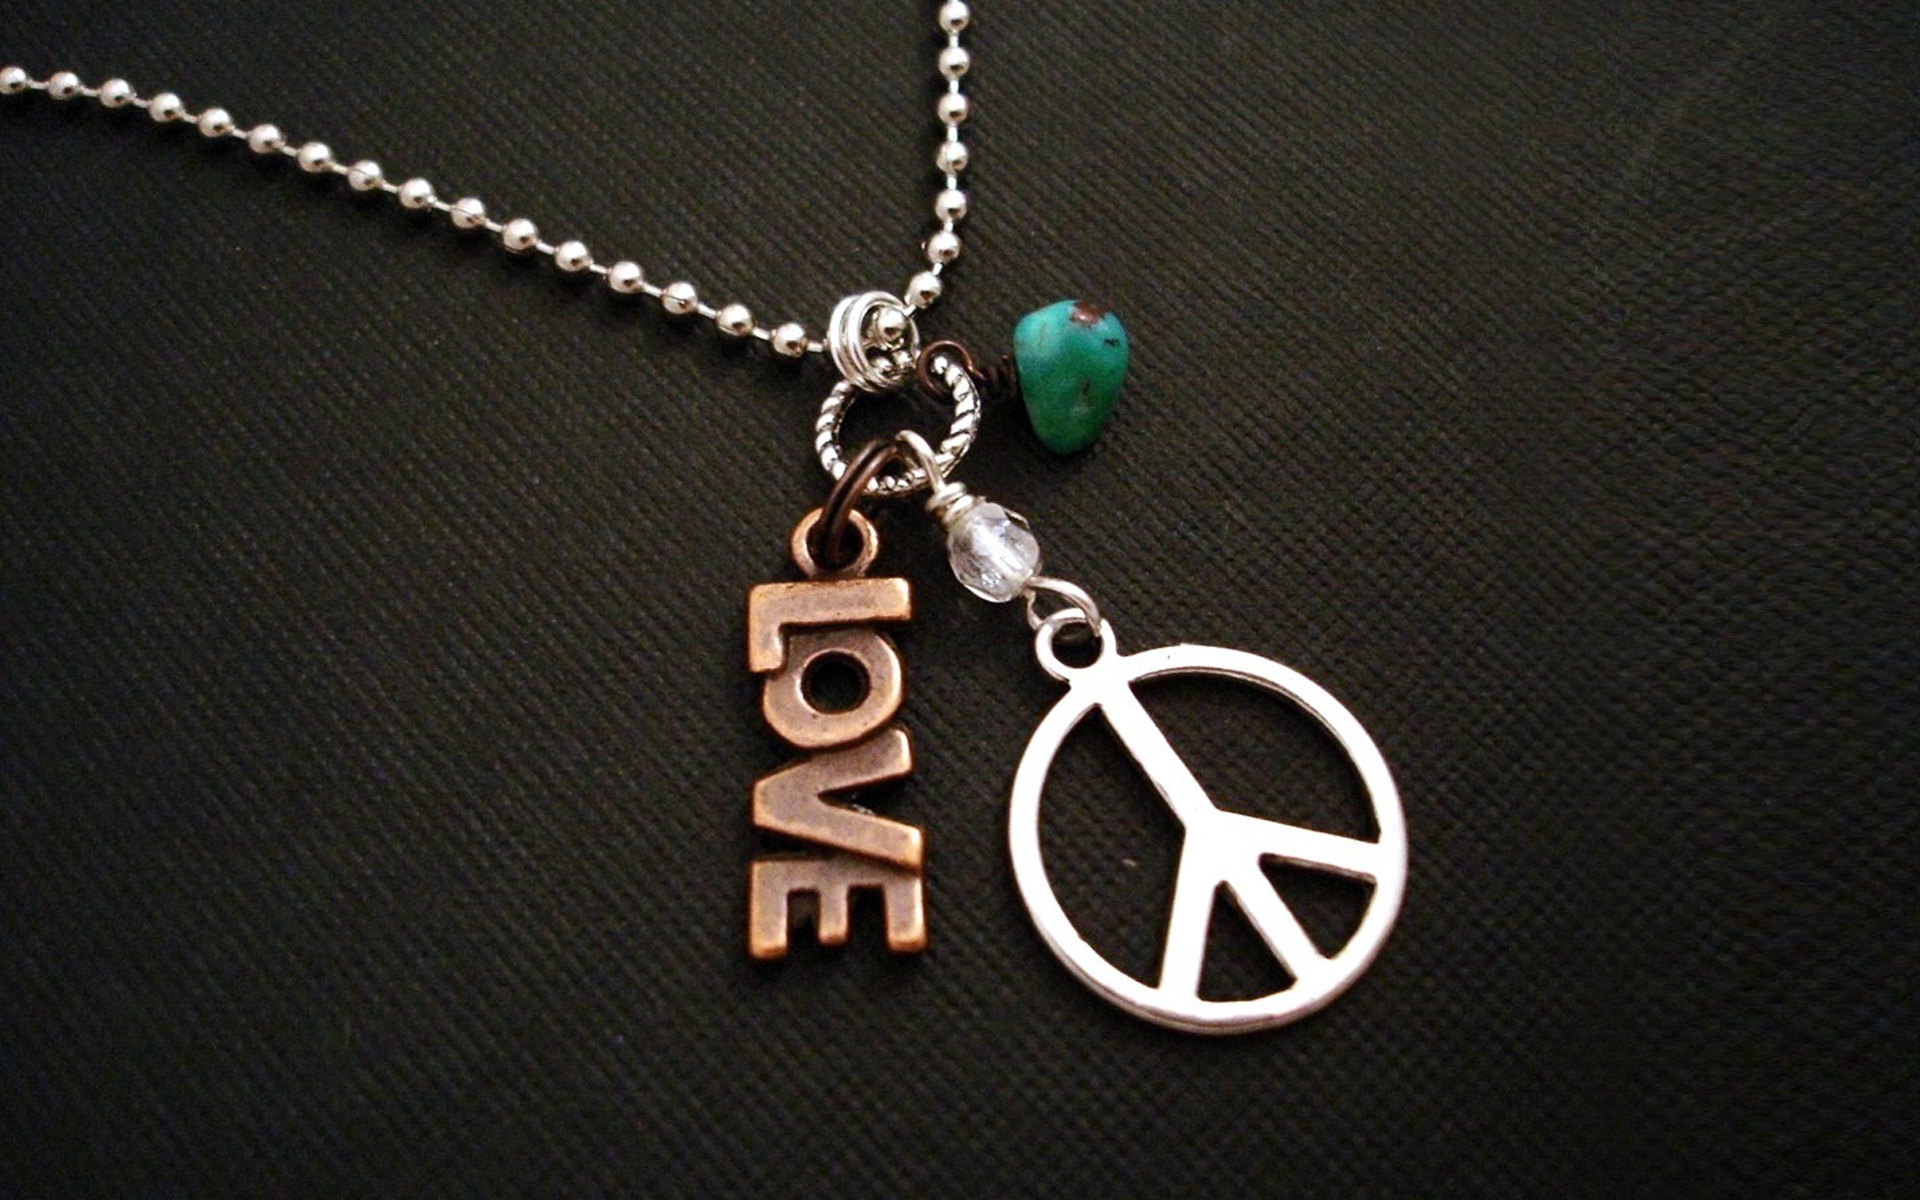 Love and peace Wallpapers Love and peace Backgrounds Love and peace